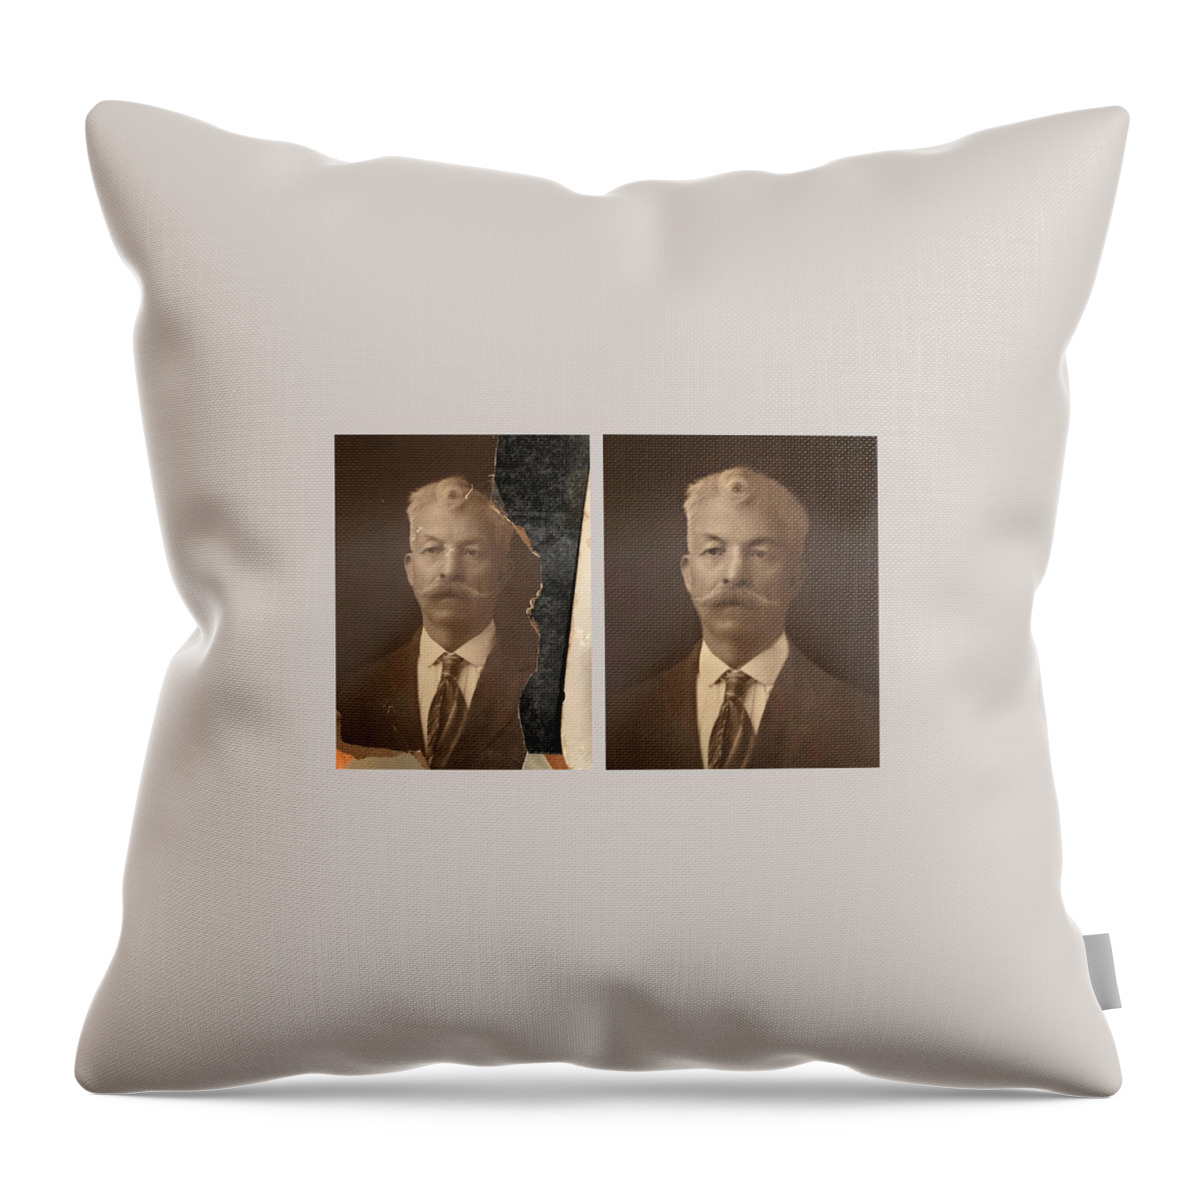 Mighty Sight Studio Steve Sperry Throw Pillow featuring the digital art Photo Restoration by Steve Sperry